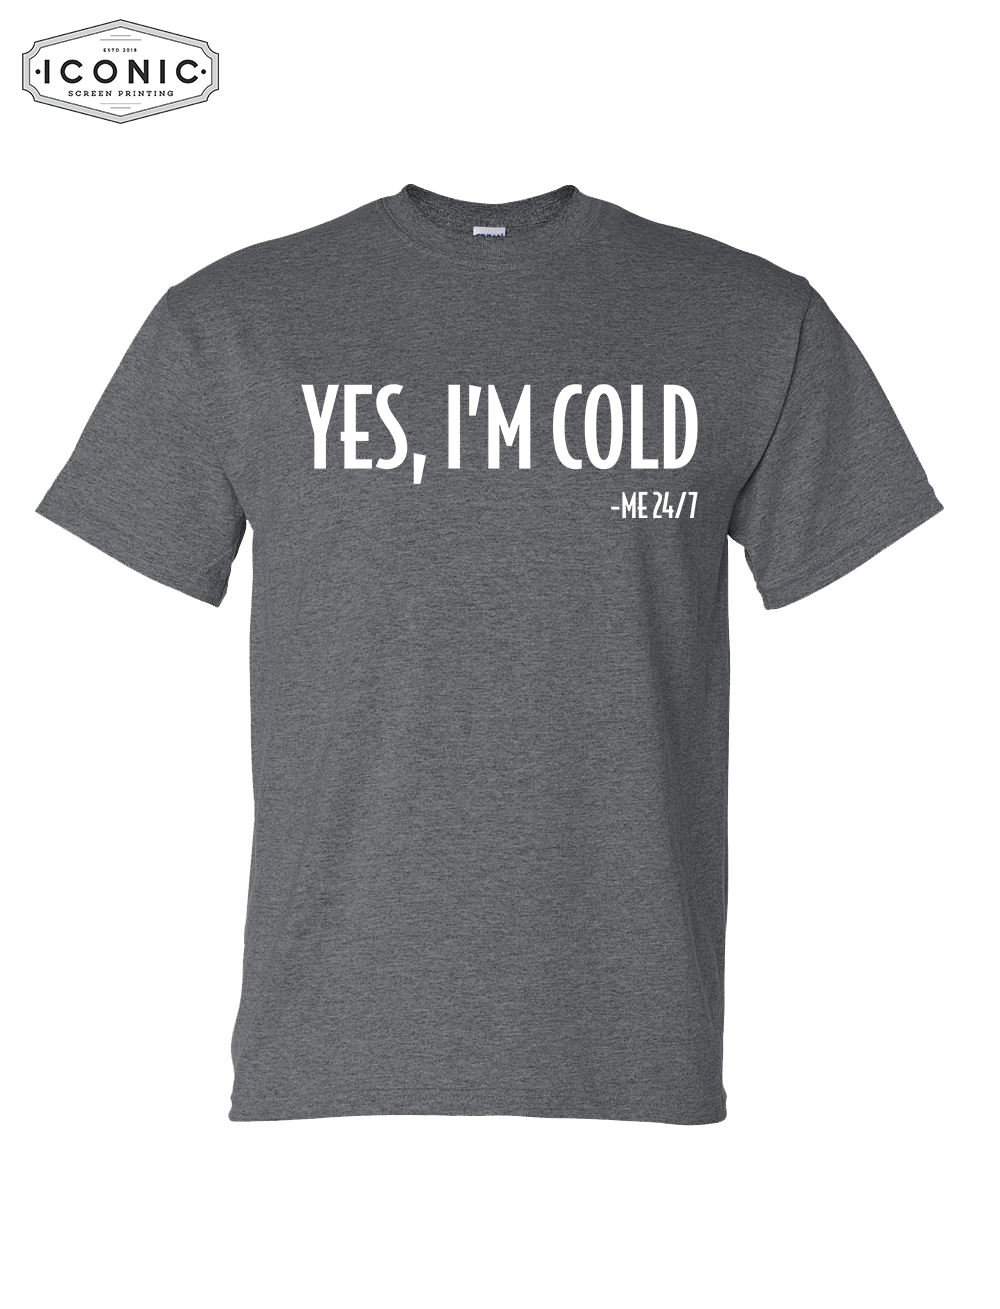 Yes, It's Cold - DryBlend T-shirt